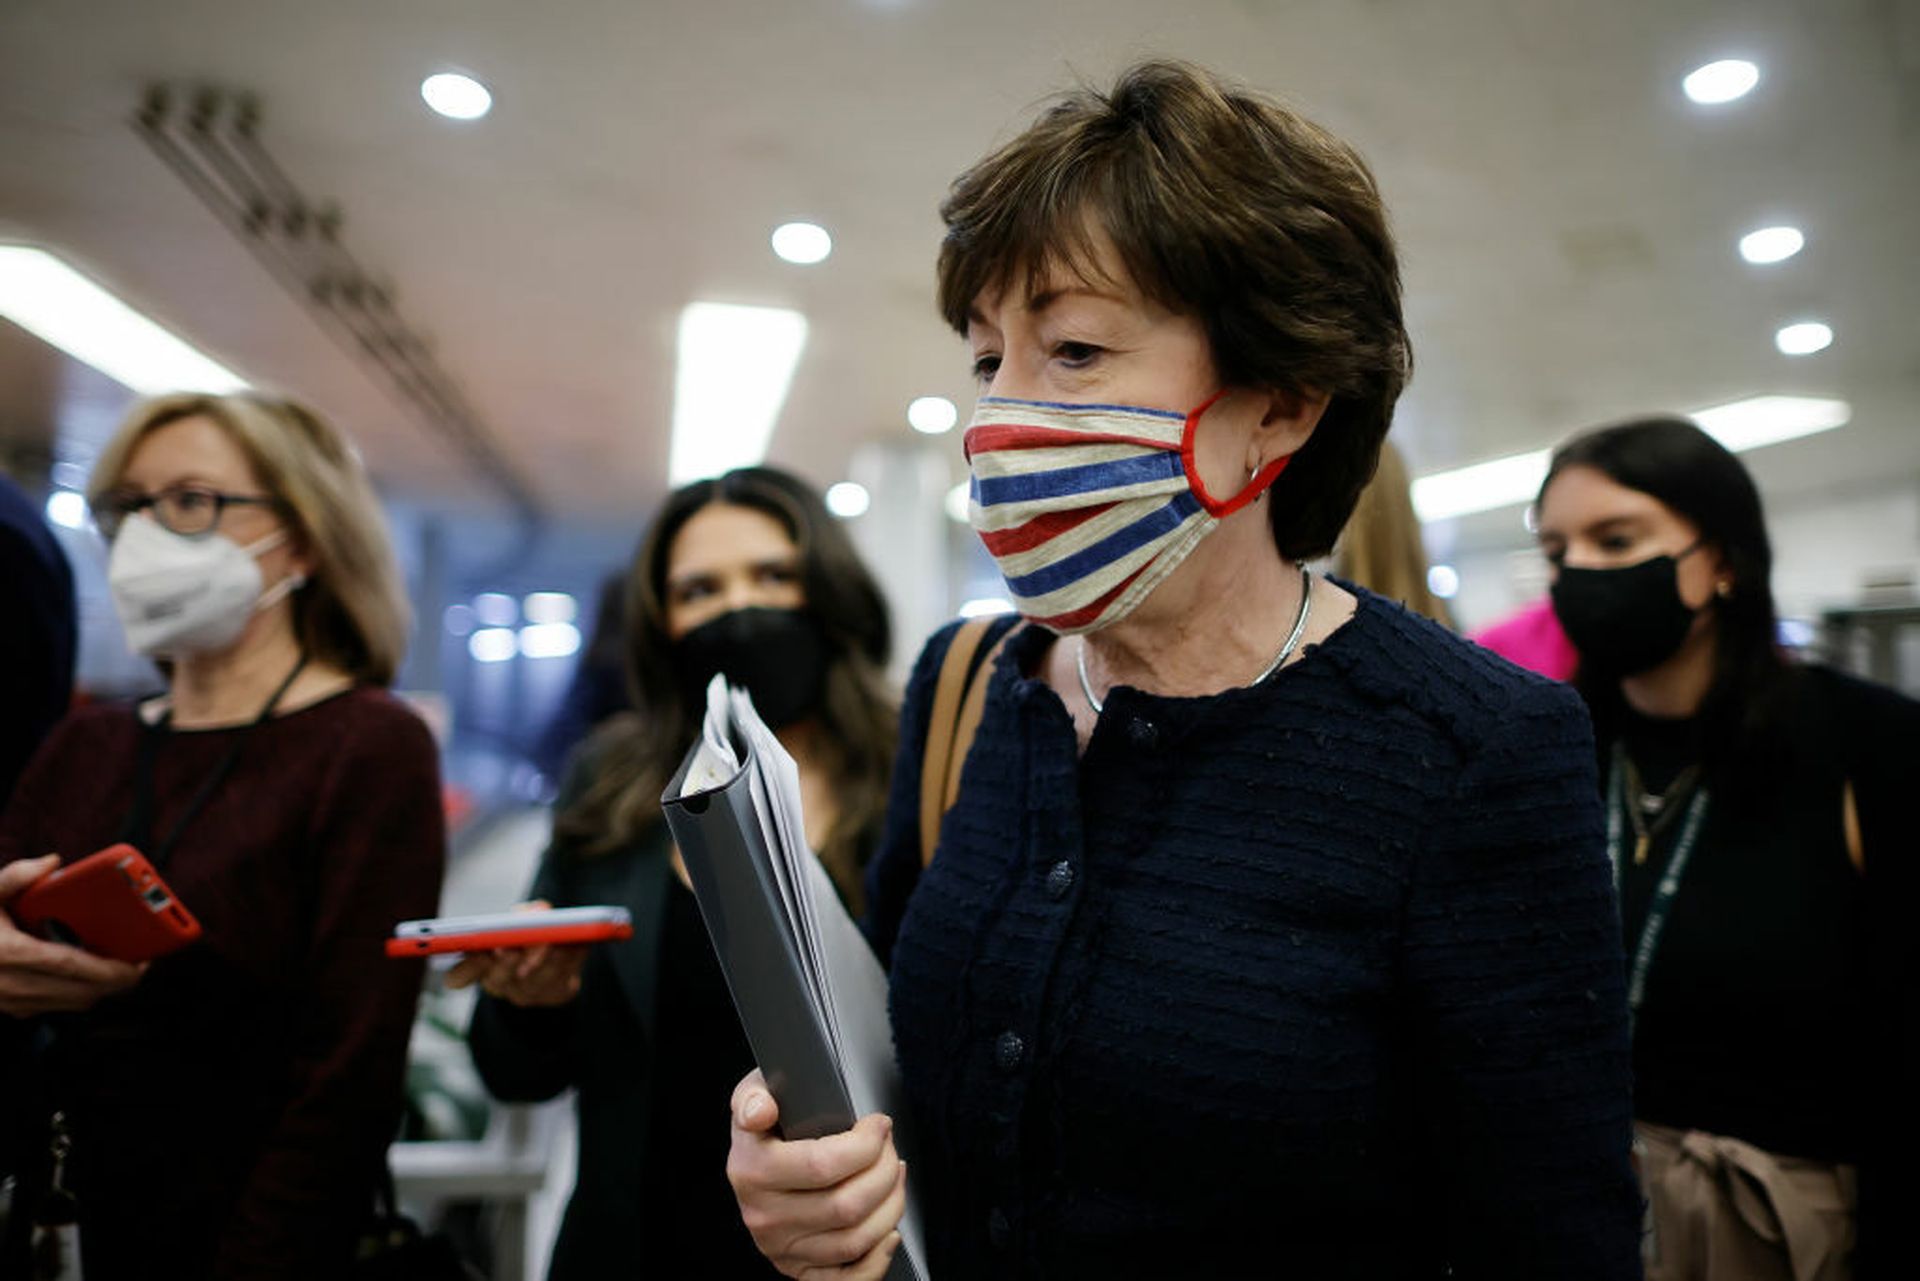 Senators Susan Collins (R-ME) and Angus King (I-ME) added their names to a bipartisan letter asking the SEC to develop new cybersecurity reporting rules for publicly traded companies. (Photo by Chip Somodevilla/Getty Images)